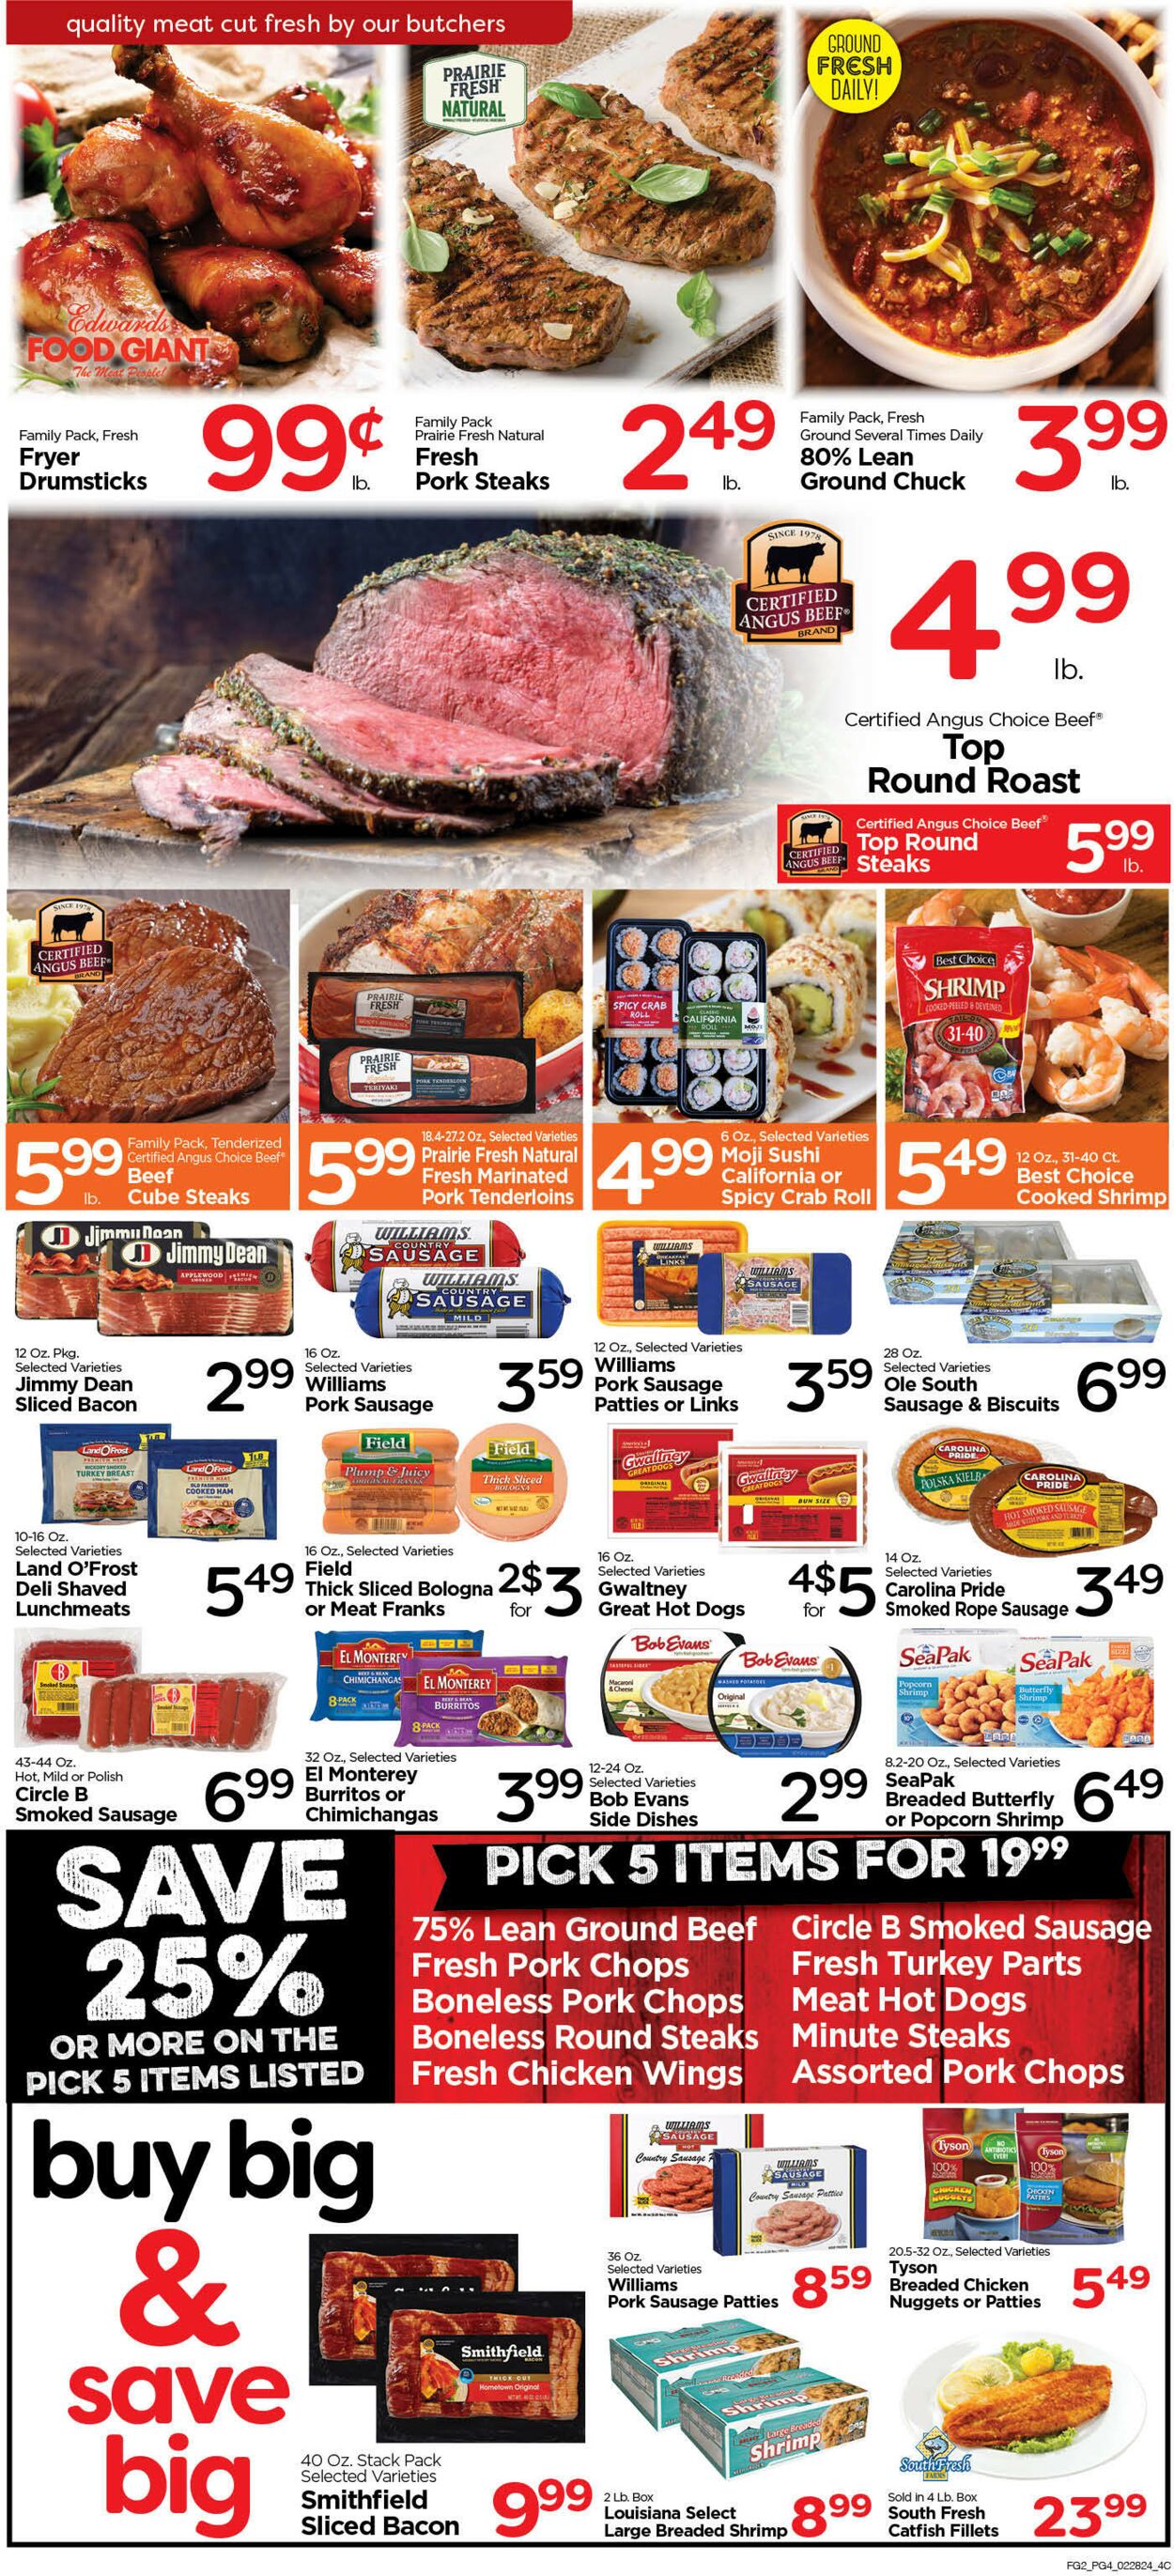 Catalogue Edwards Food Giant from 02/28/2024